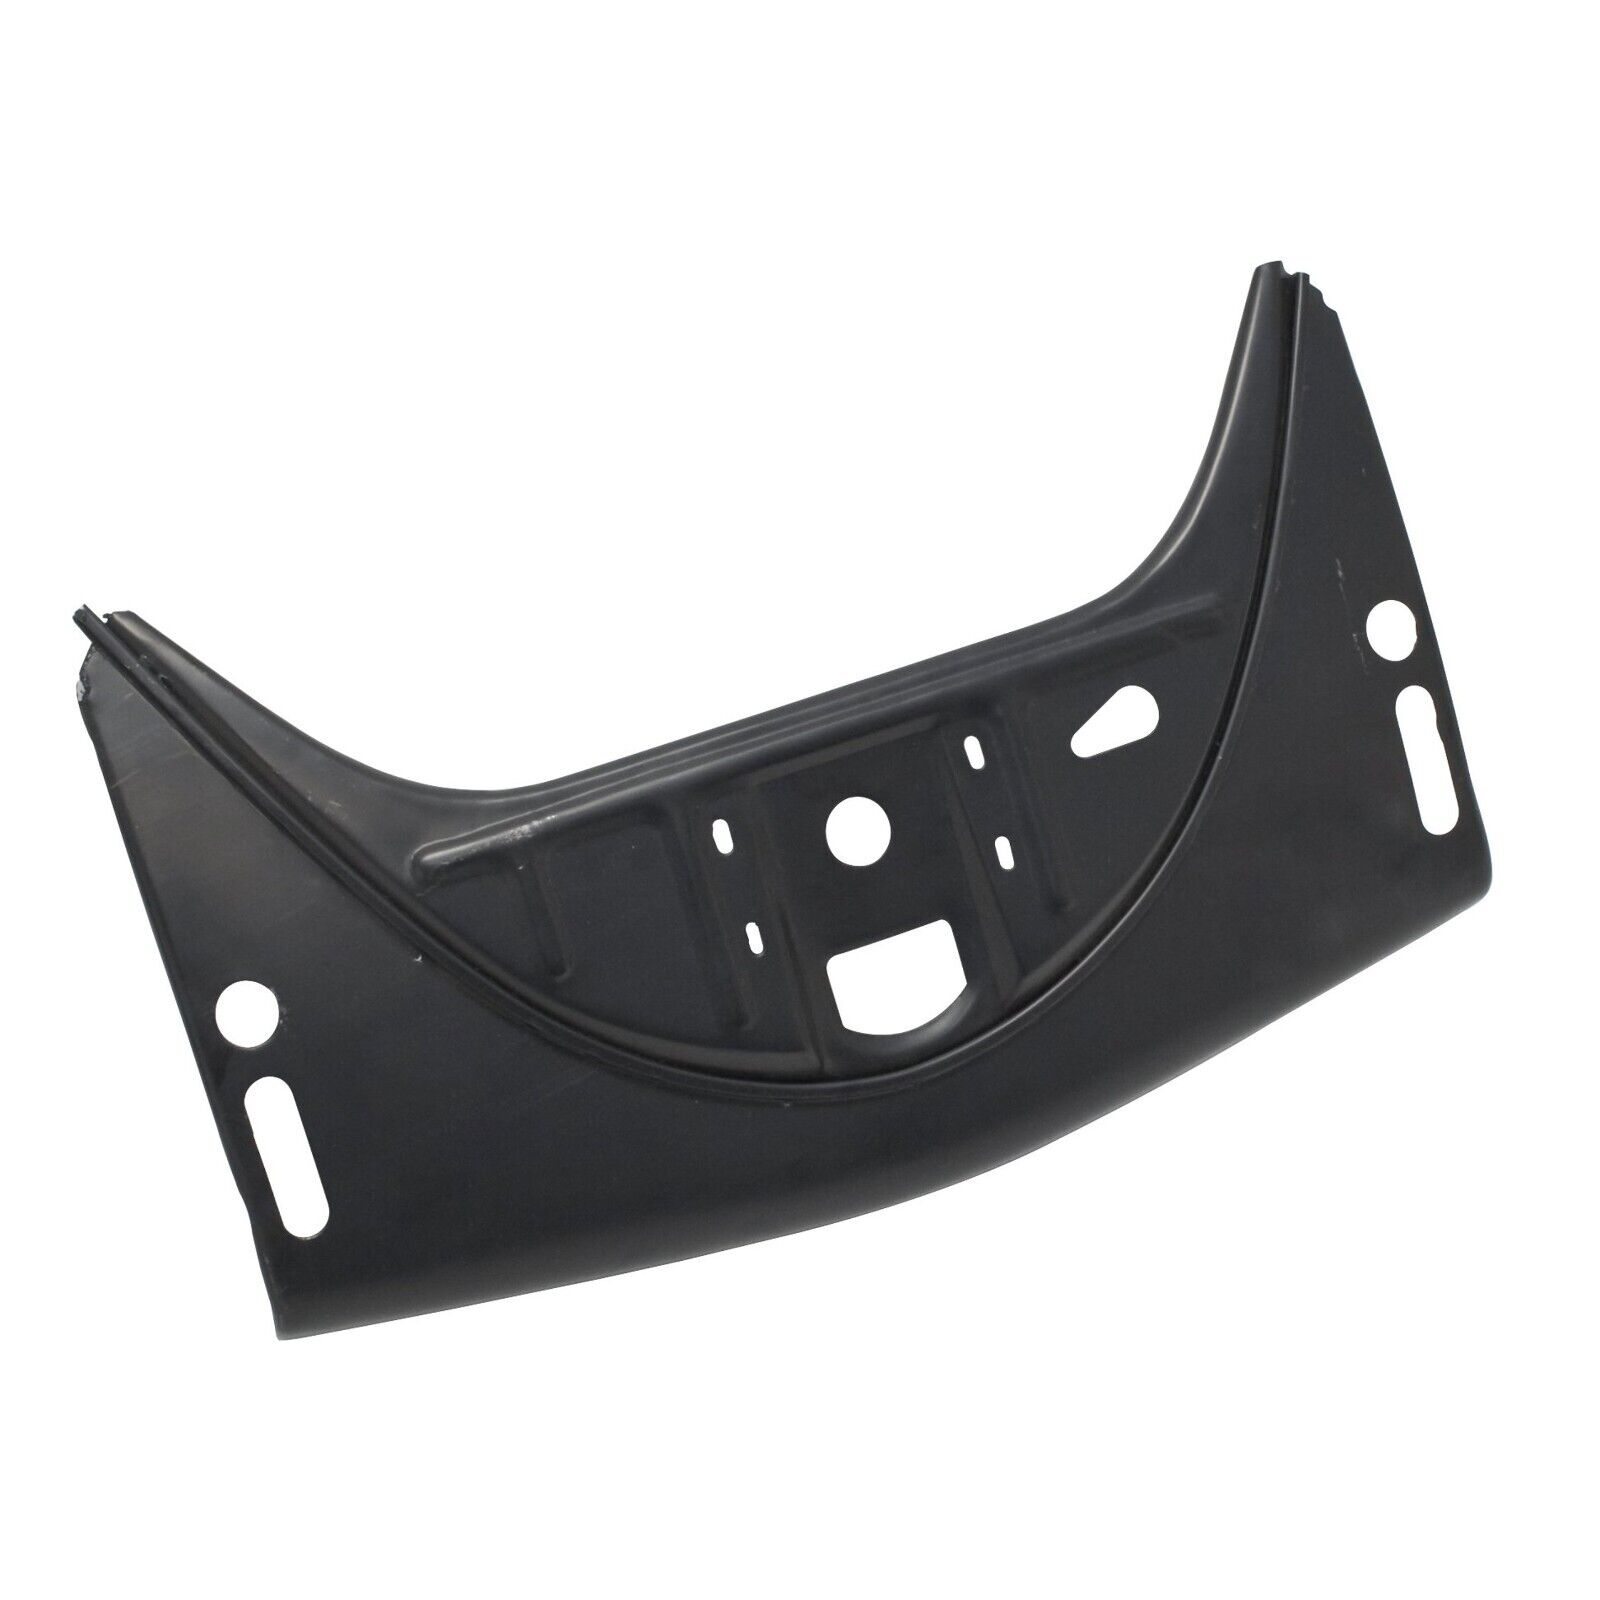 Body Panel for 1958-1967 VW Beetle Front Apron with Bumper Overrider Holes